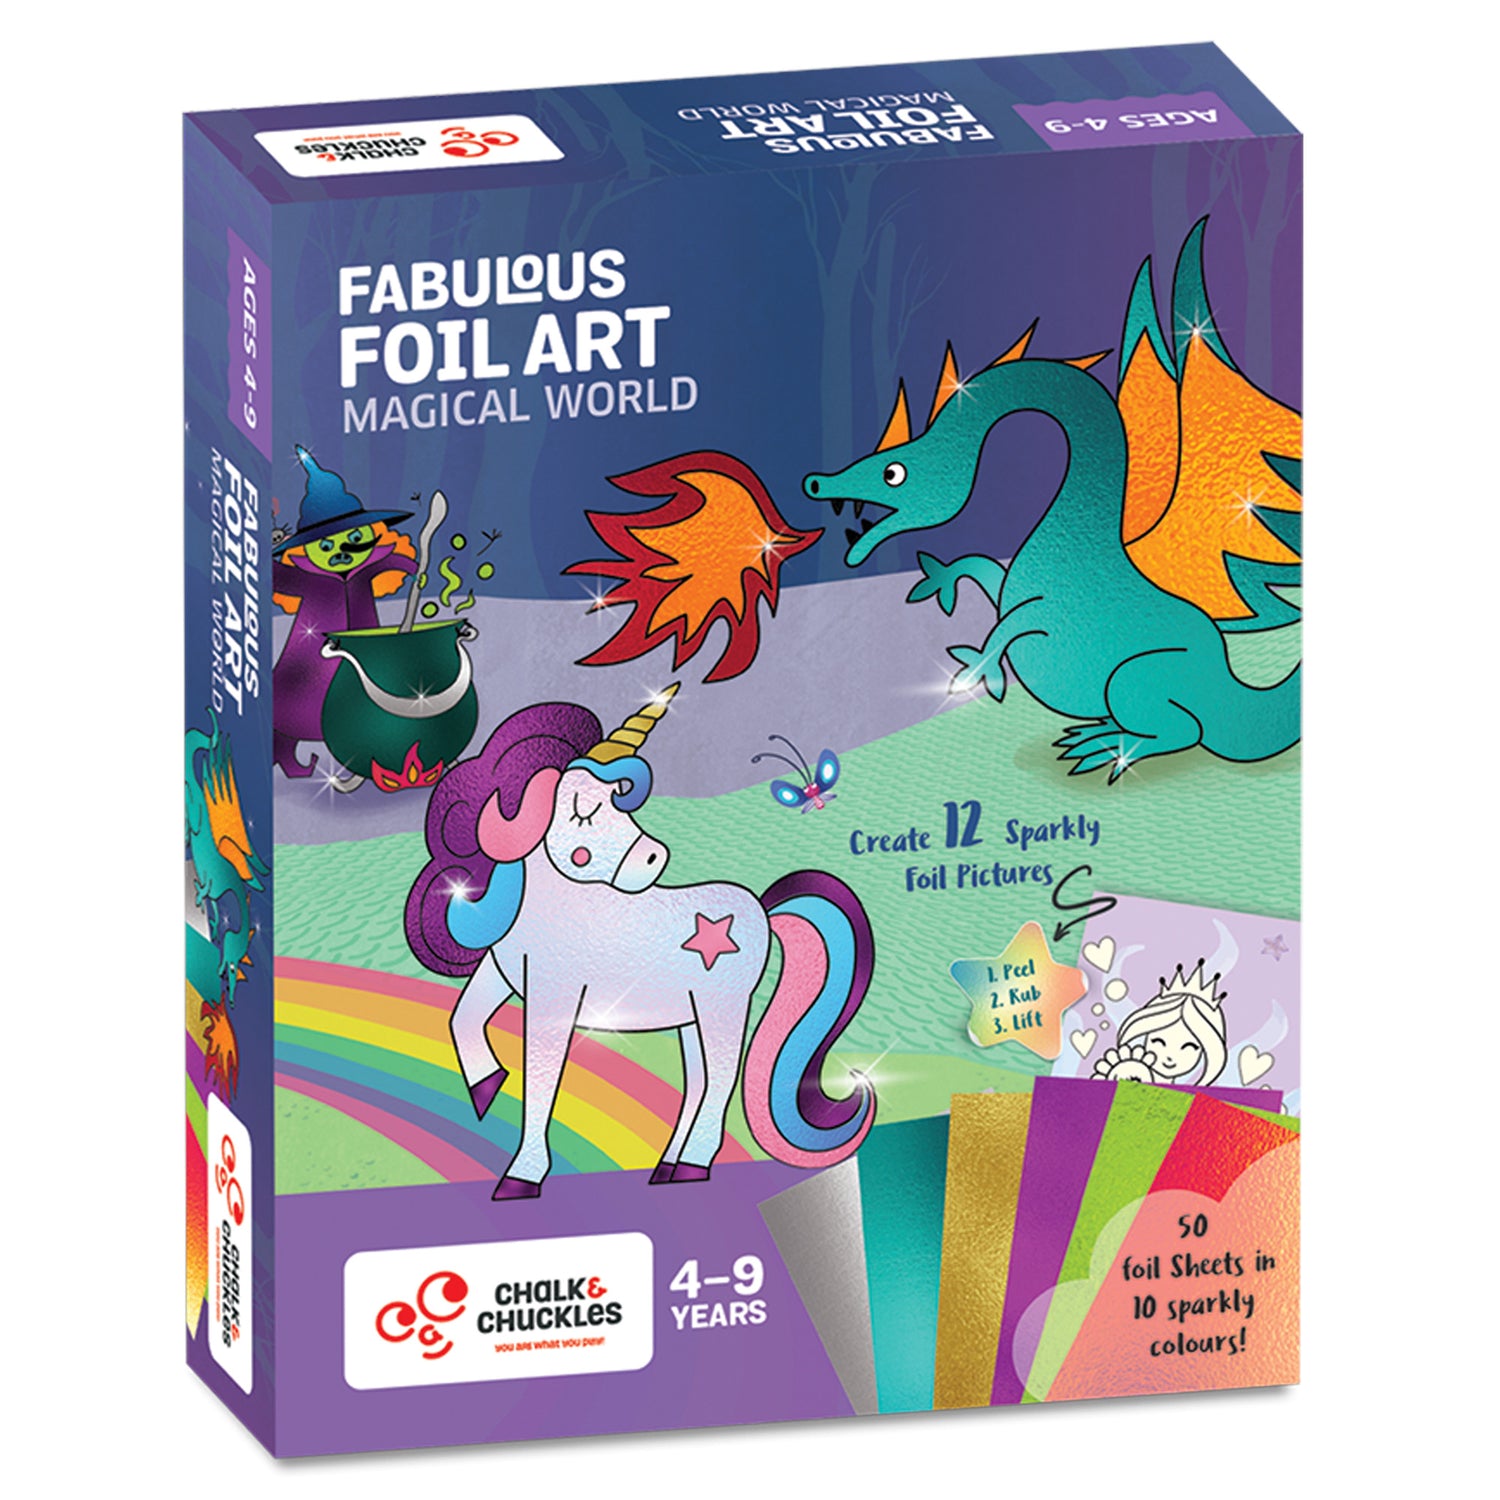 Foil Art Kit Singapore  Easy To Follow Step By Step